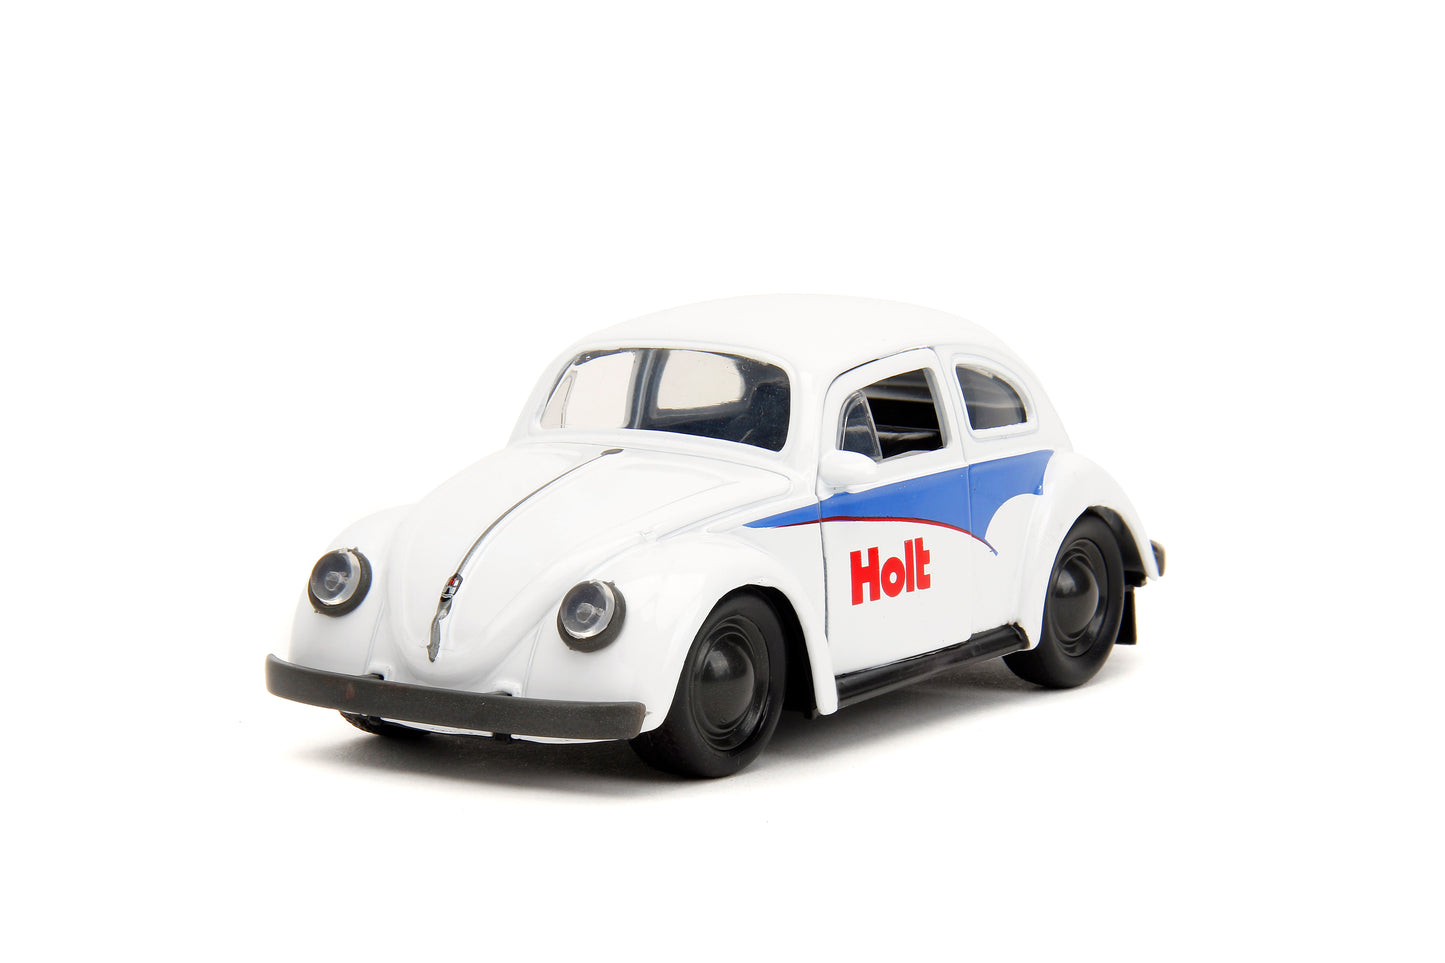 Punch Buggy 1:32 1959 Volkswagen Beetle Die-cast Car with Mini Gloves Accessory (White) (This is a Pre Order)